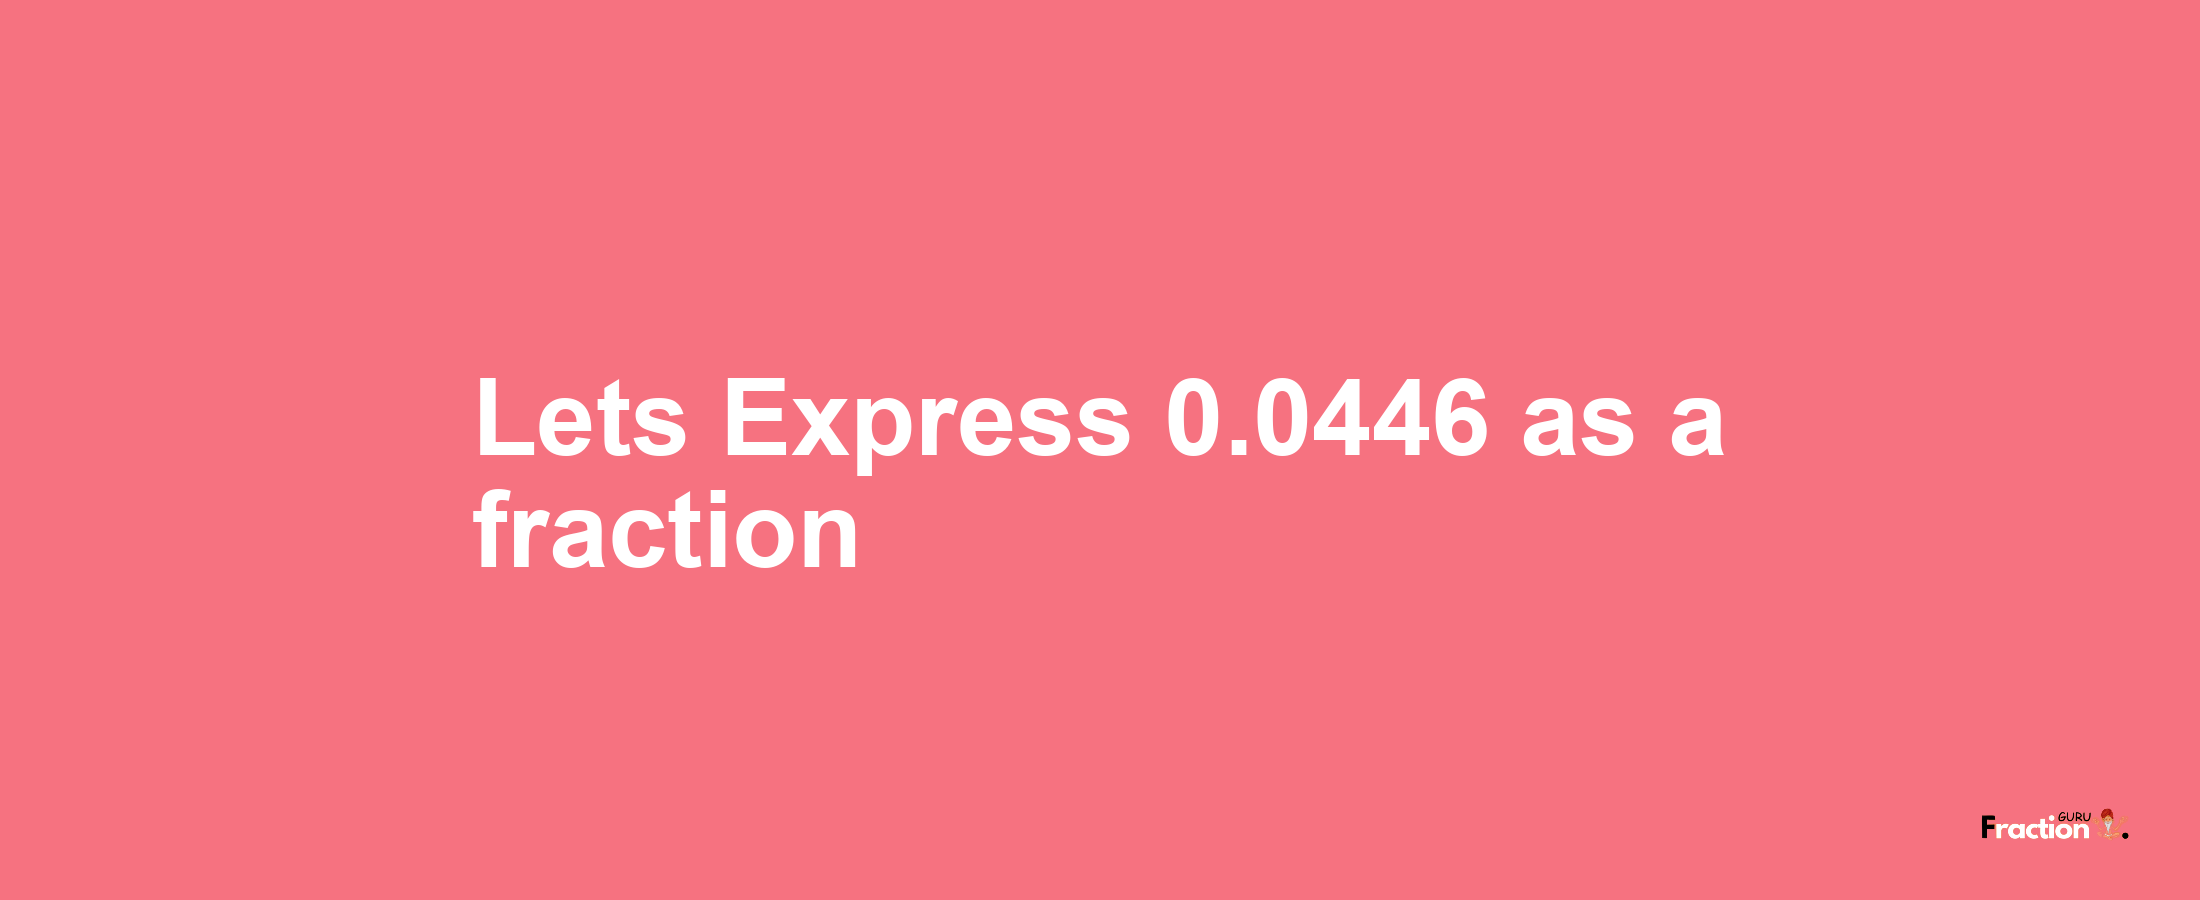 Lets Express 0.0446 as afraction